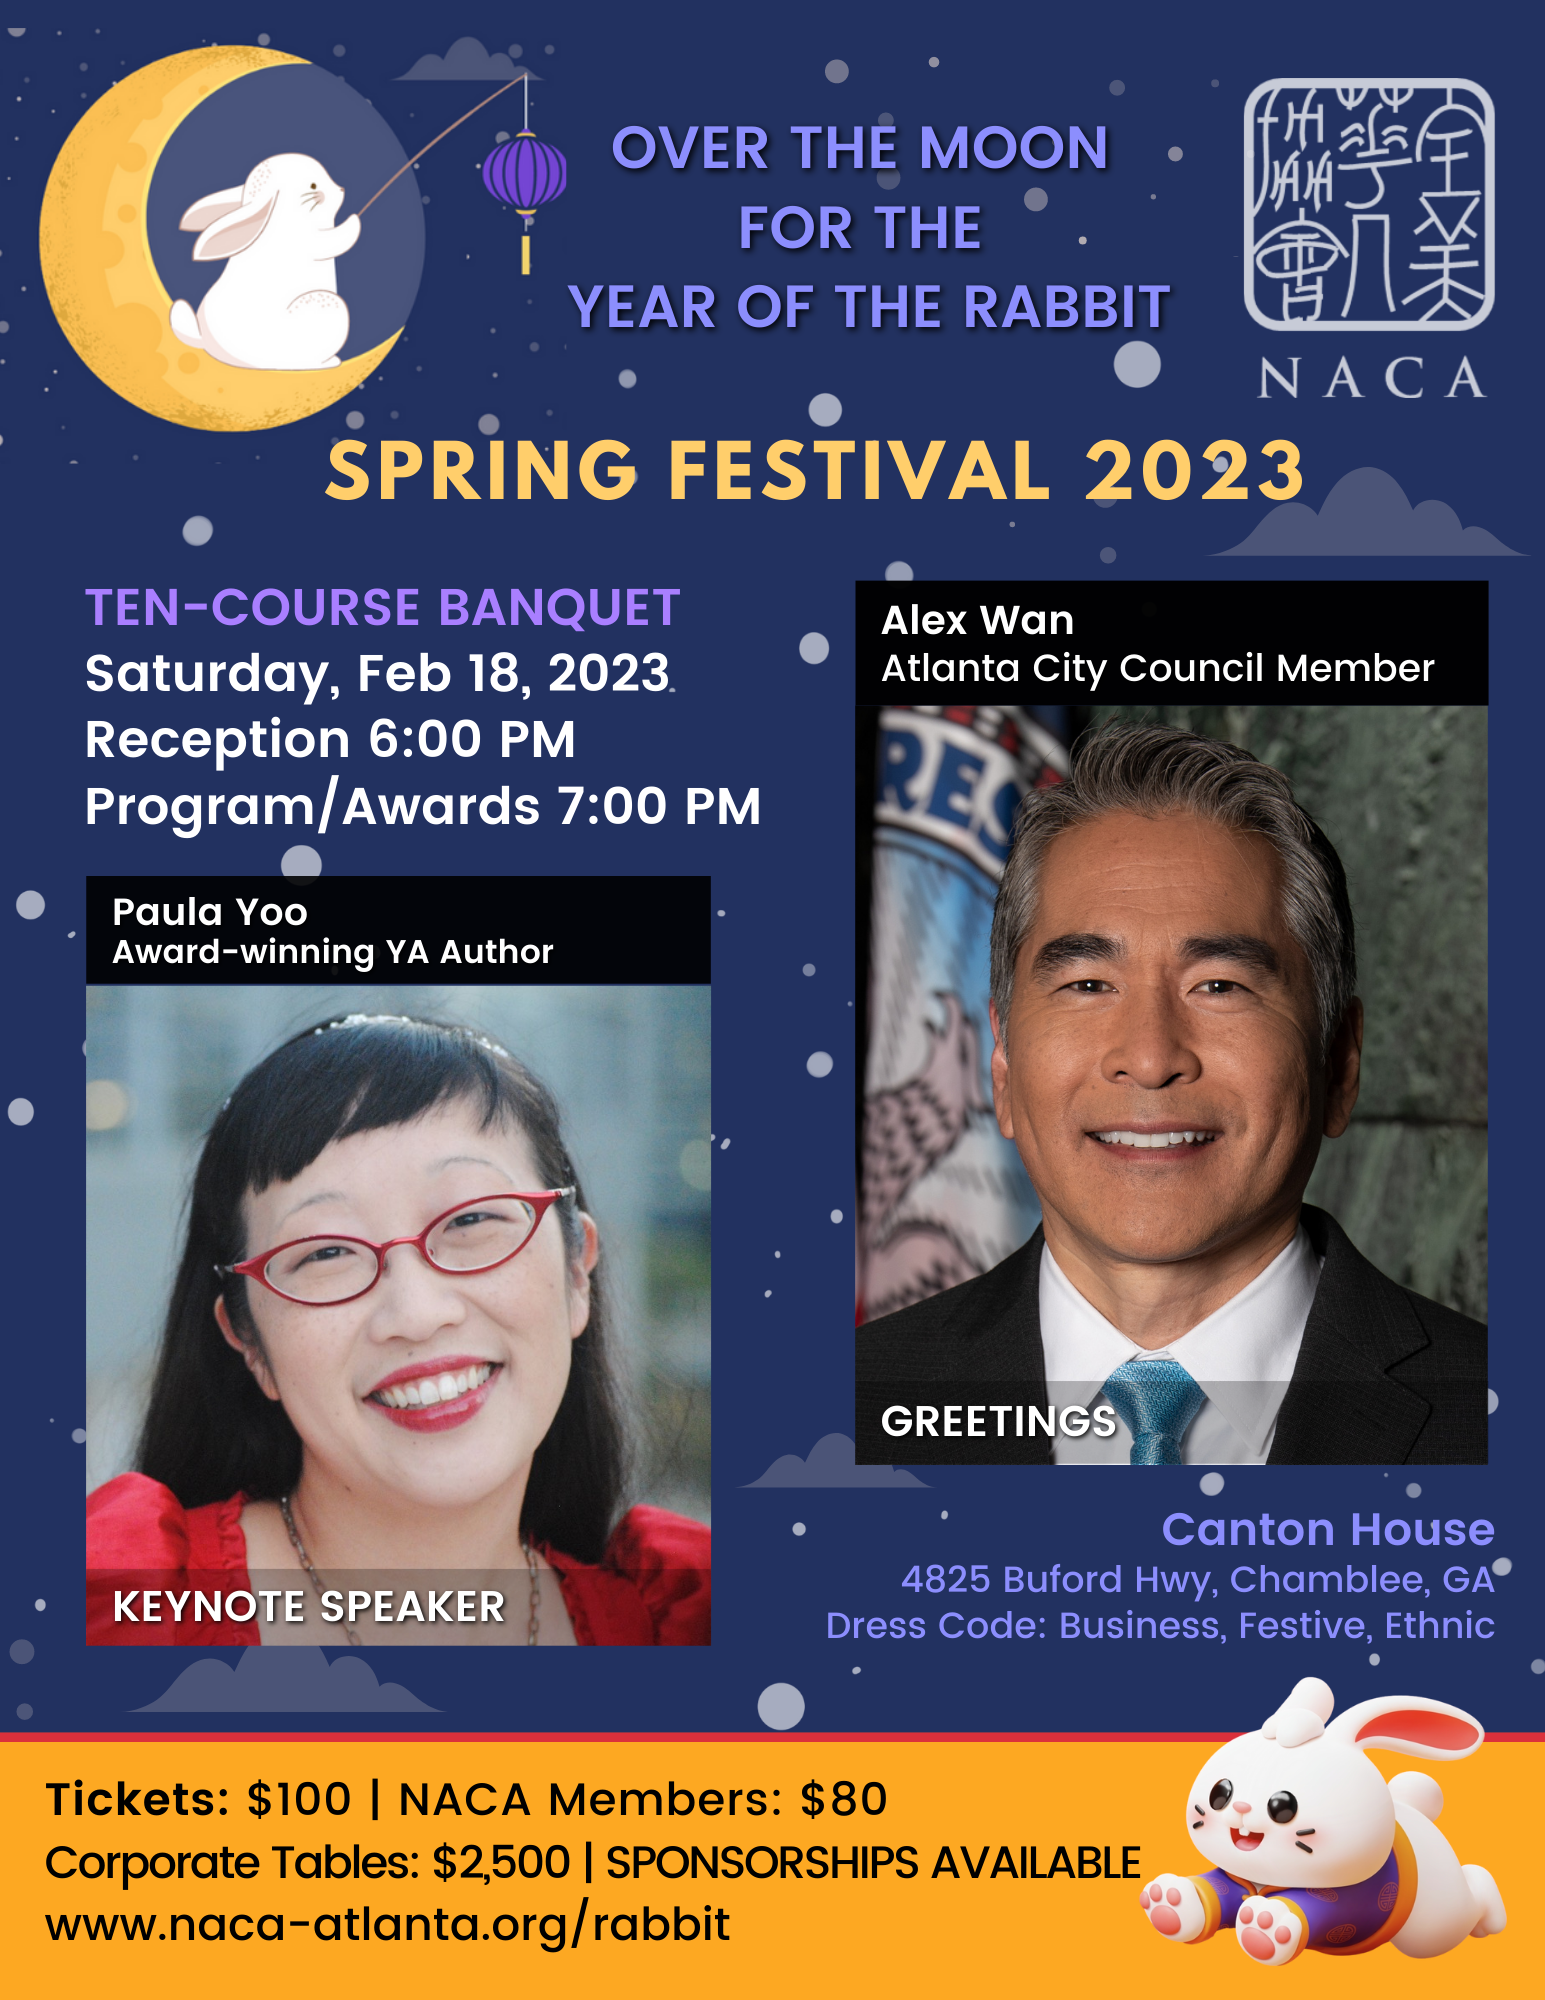 NACA 2023 Spring Festival Flyer With Speakers